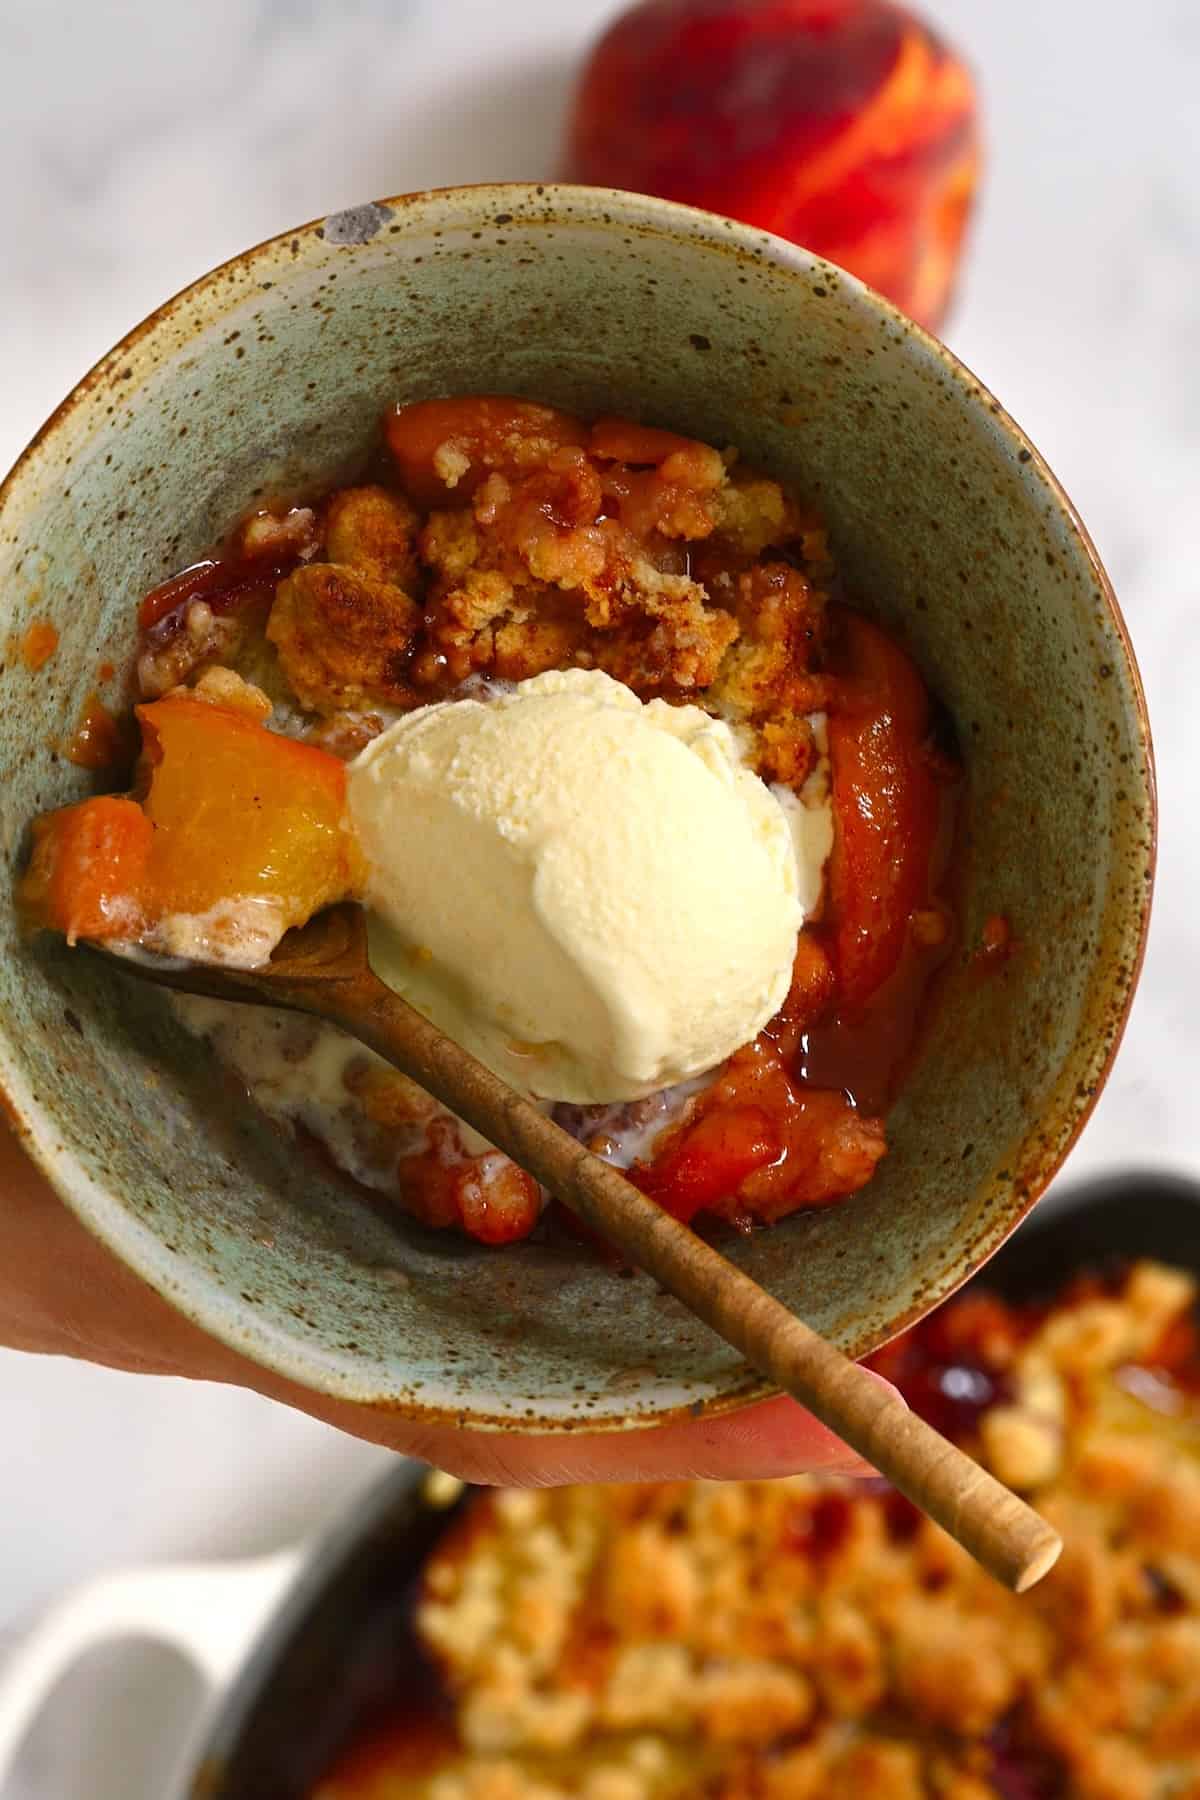 A serving of peach crumble with ice cream on top